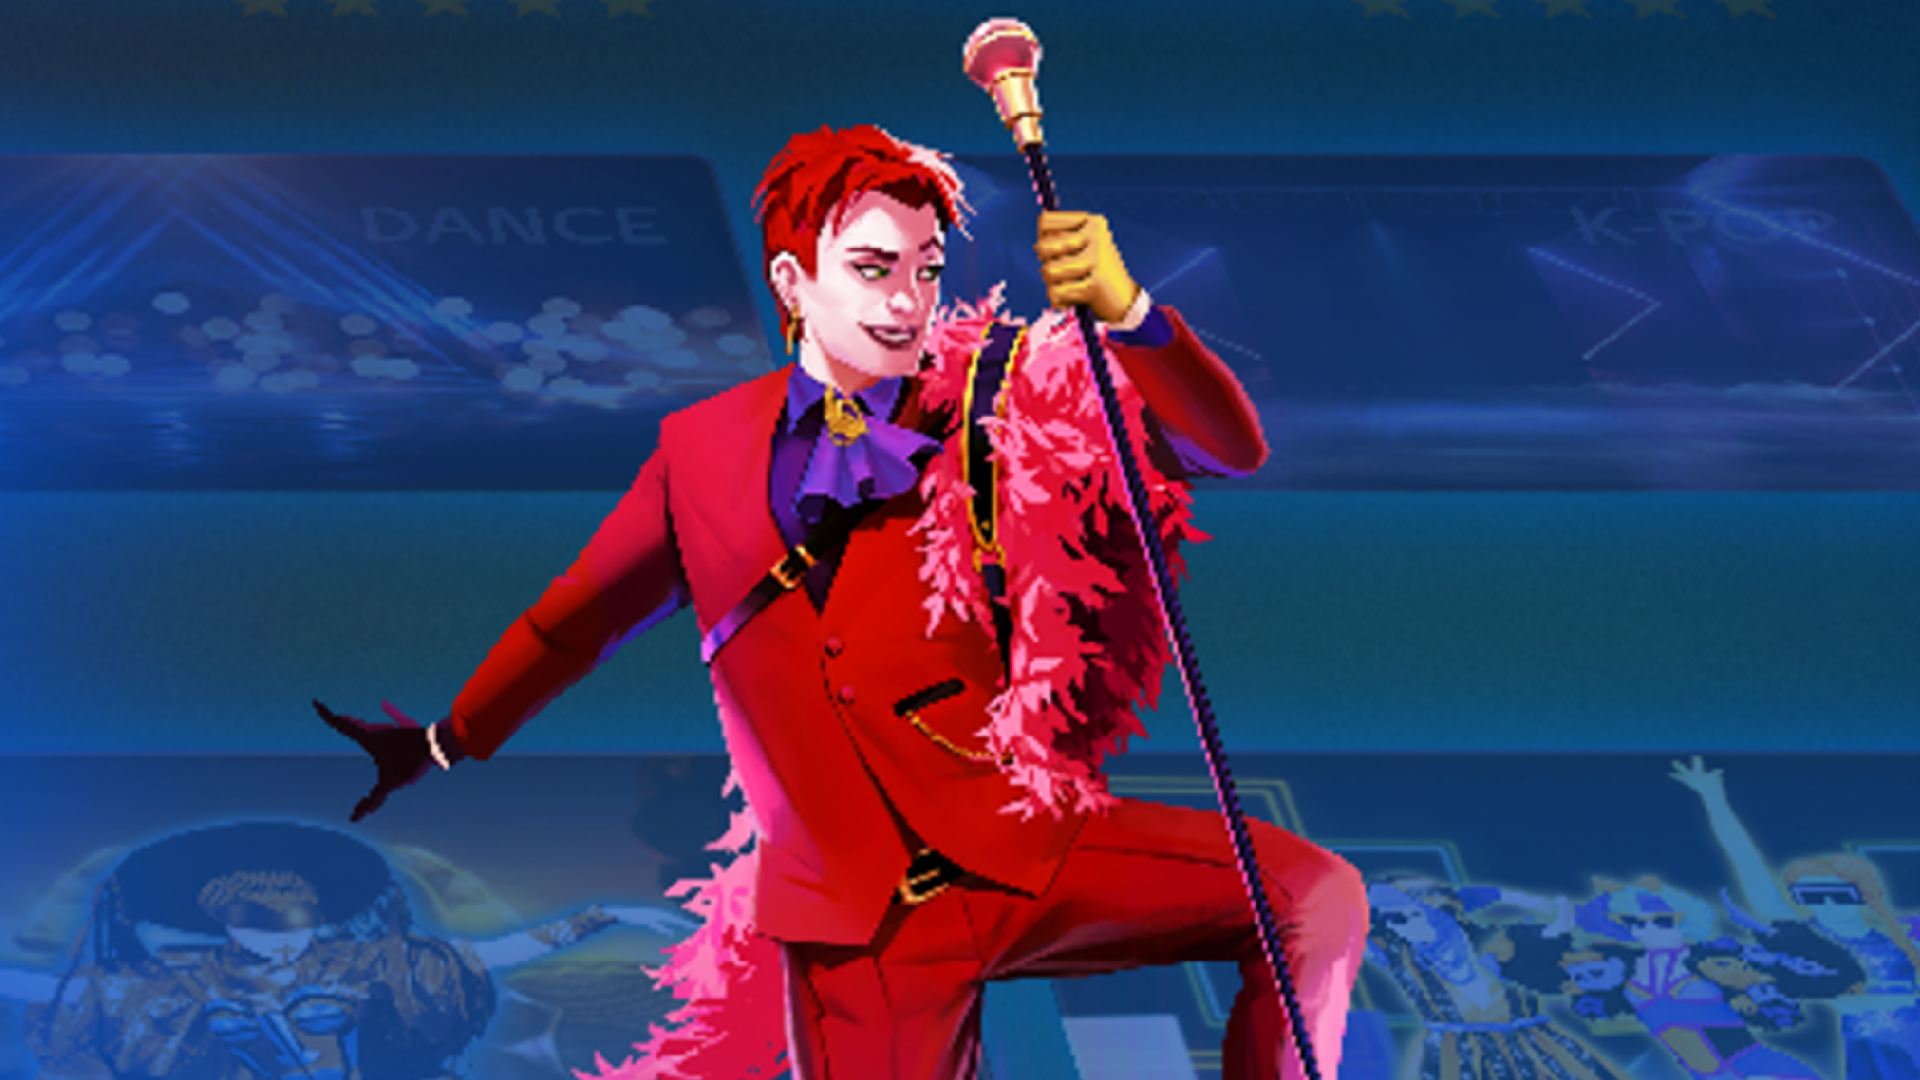 Just Dance coming to PS4 Xbox One? | The Loadout